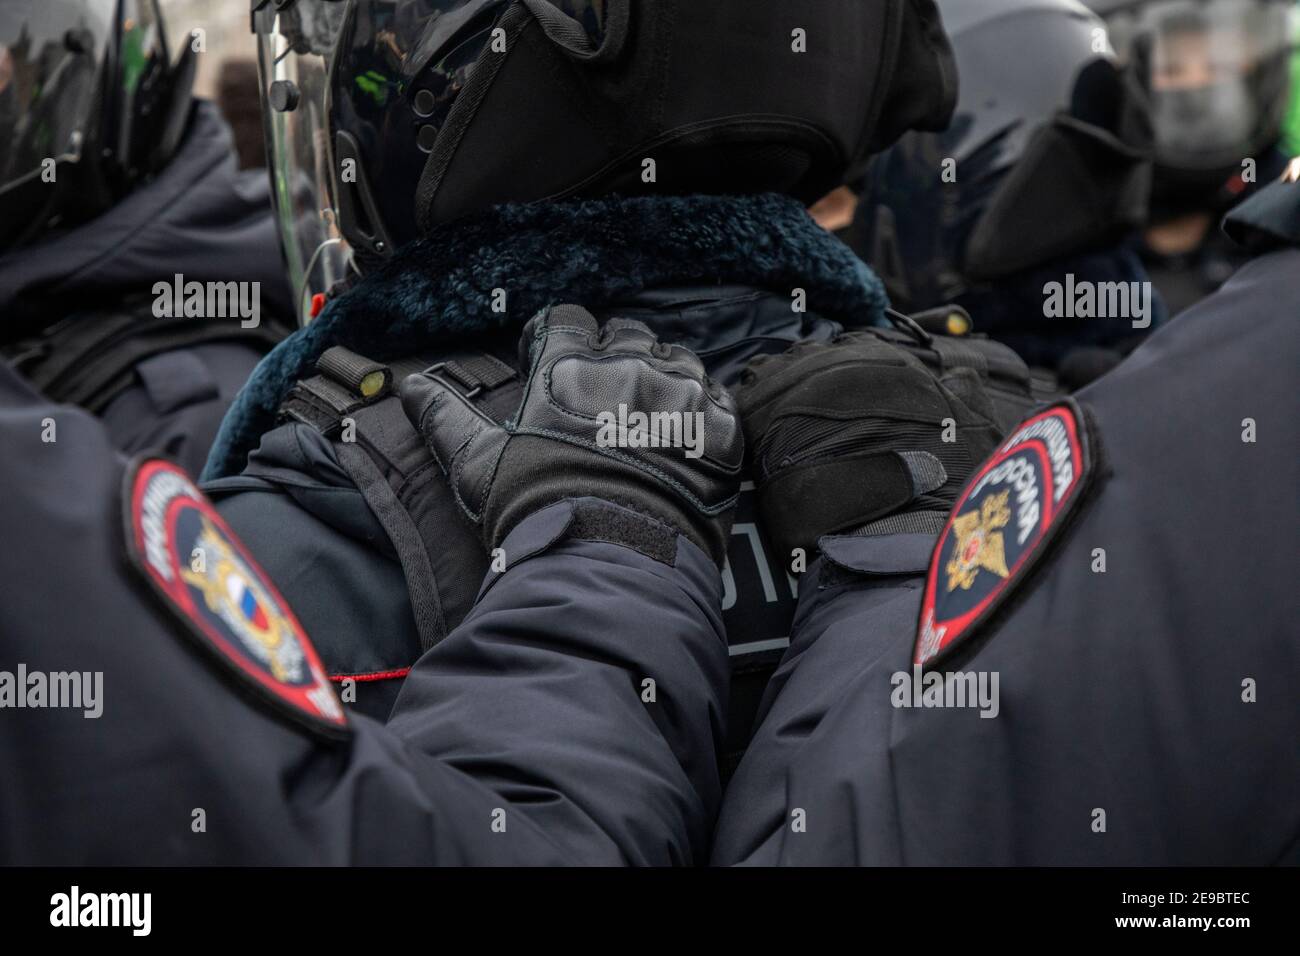 Moscow, Russia. 23rd of January, 2021 Riot police officers ensure law and order at an unsanctioned rally in support of Russian opposition leader Alexei Navalny at Pushkinskaya Square in Moscow, Russia Stock Photo